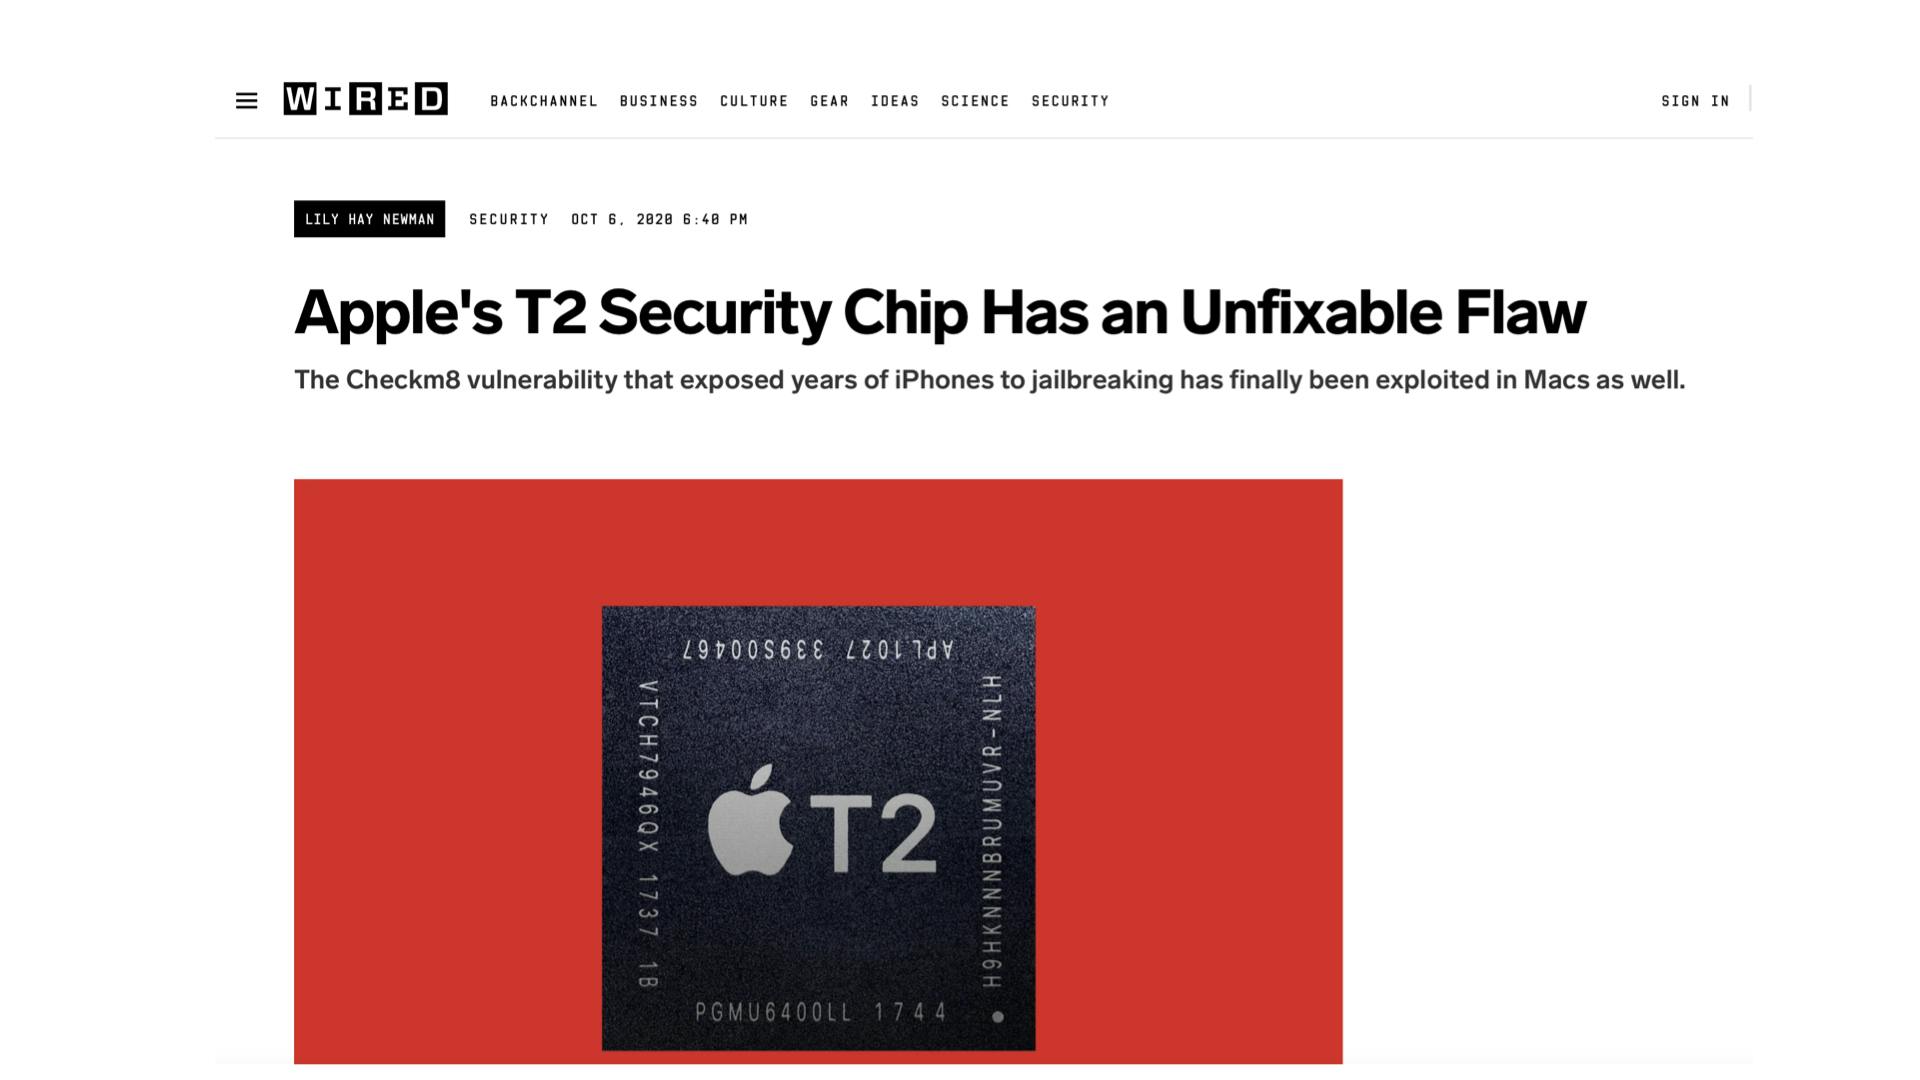 https://www.wired.com/story/apple-t2-chip-unfixable-flaw-jailbreak-mac/